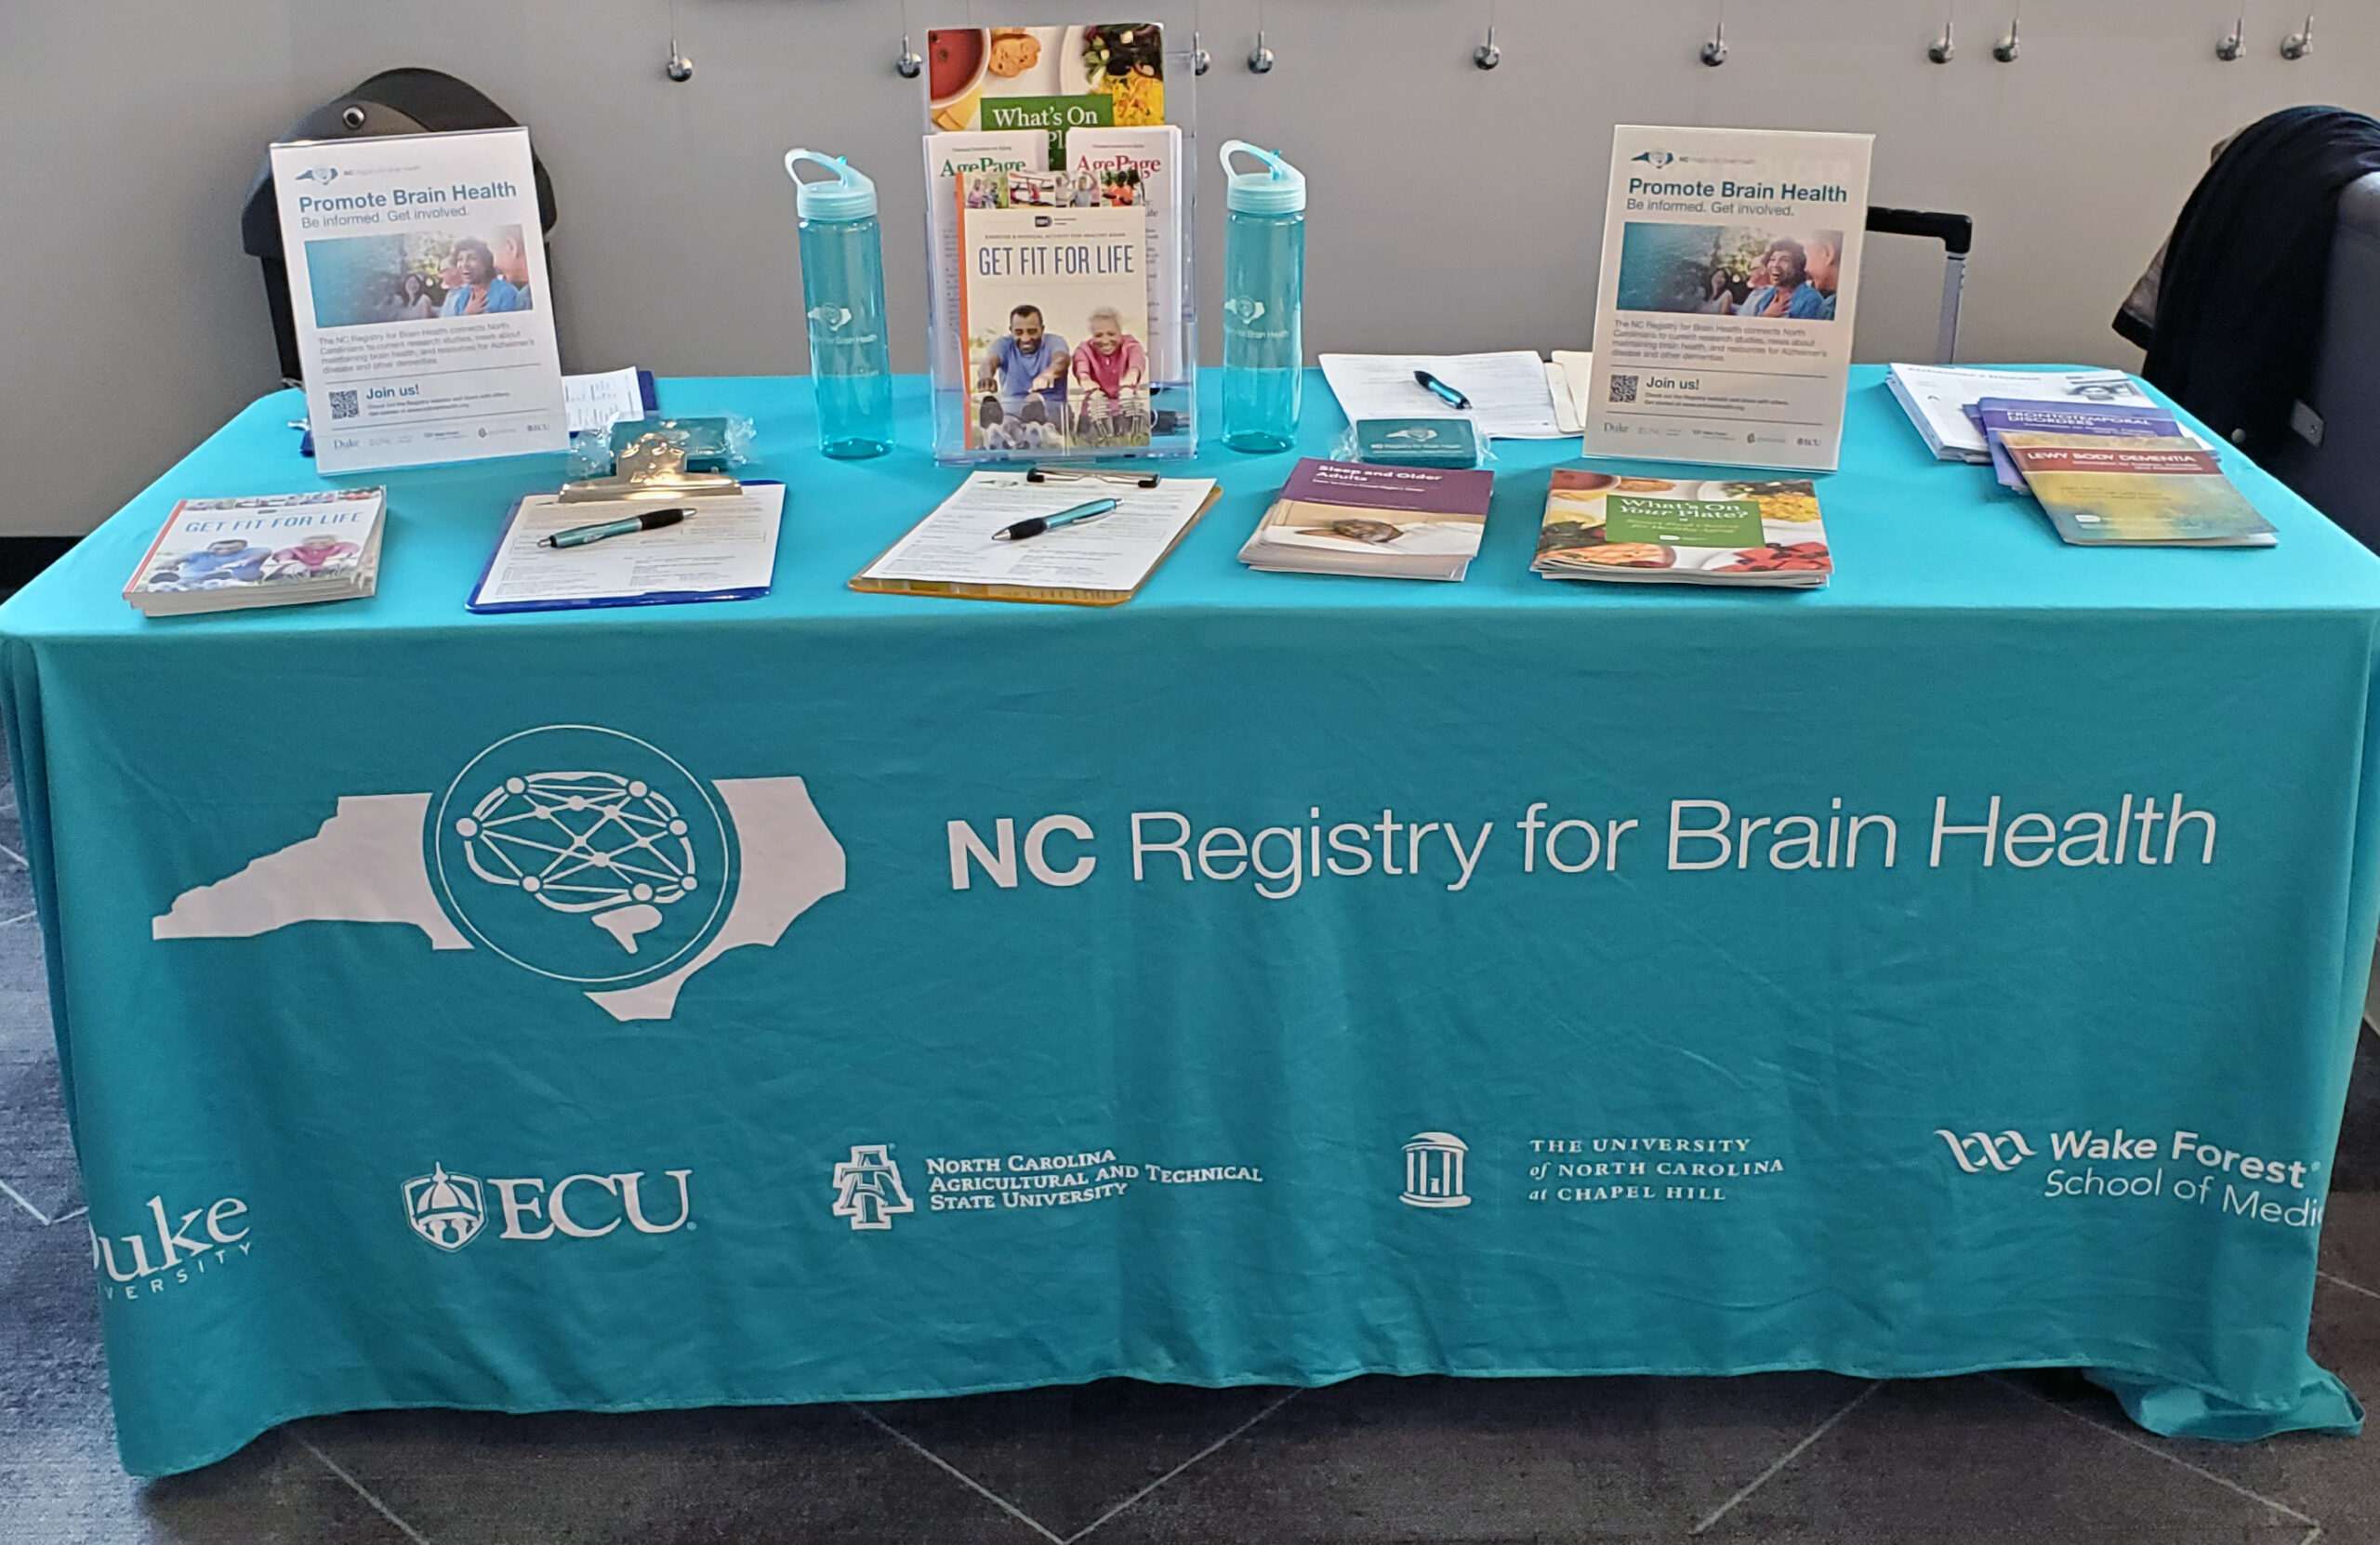 Table displaying NC Registry for Brain Health materials.